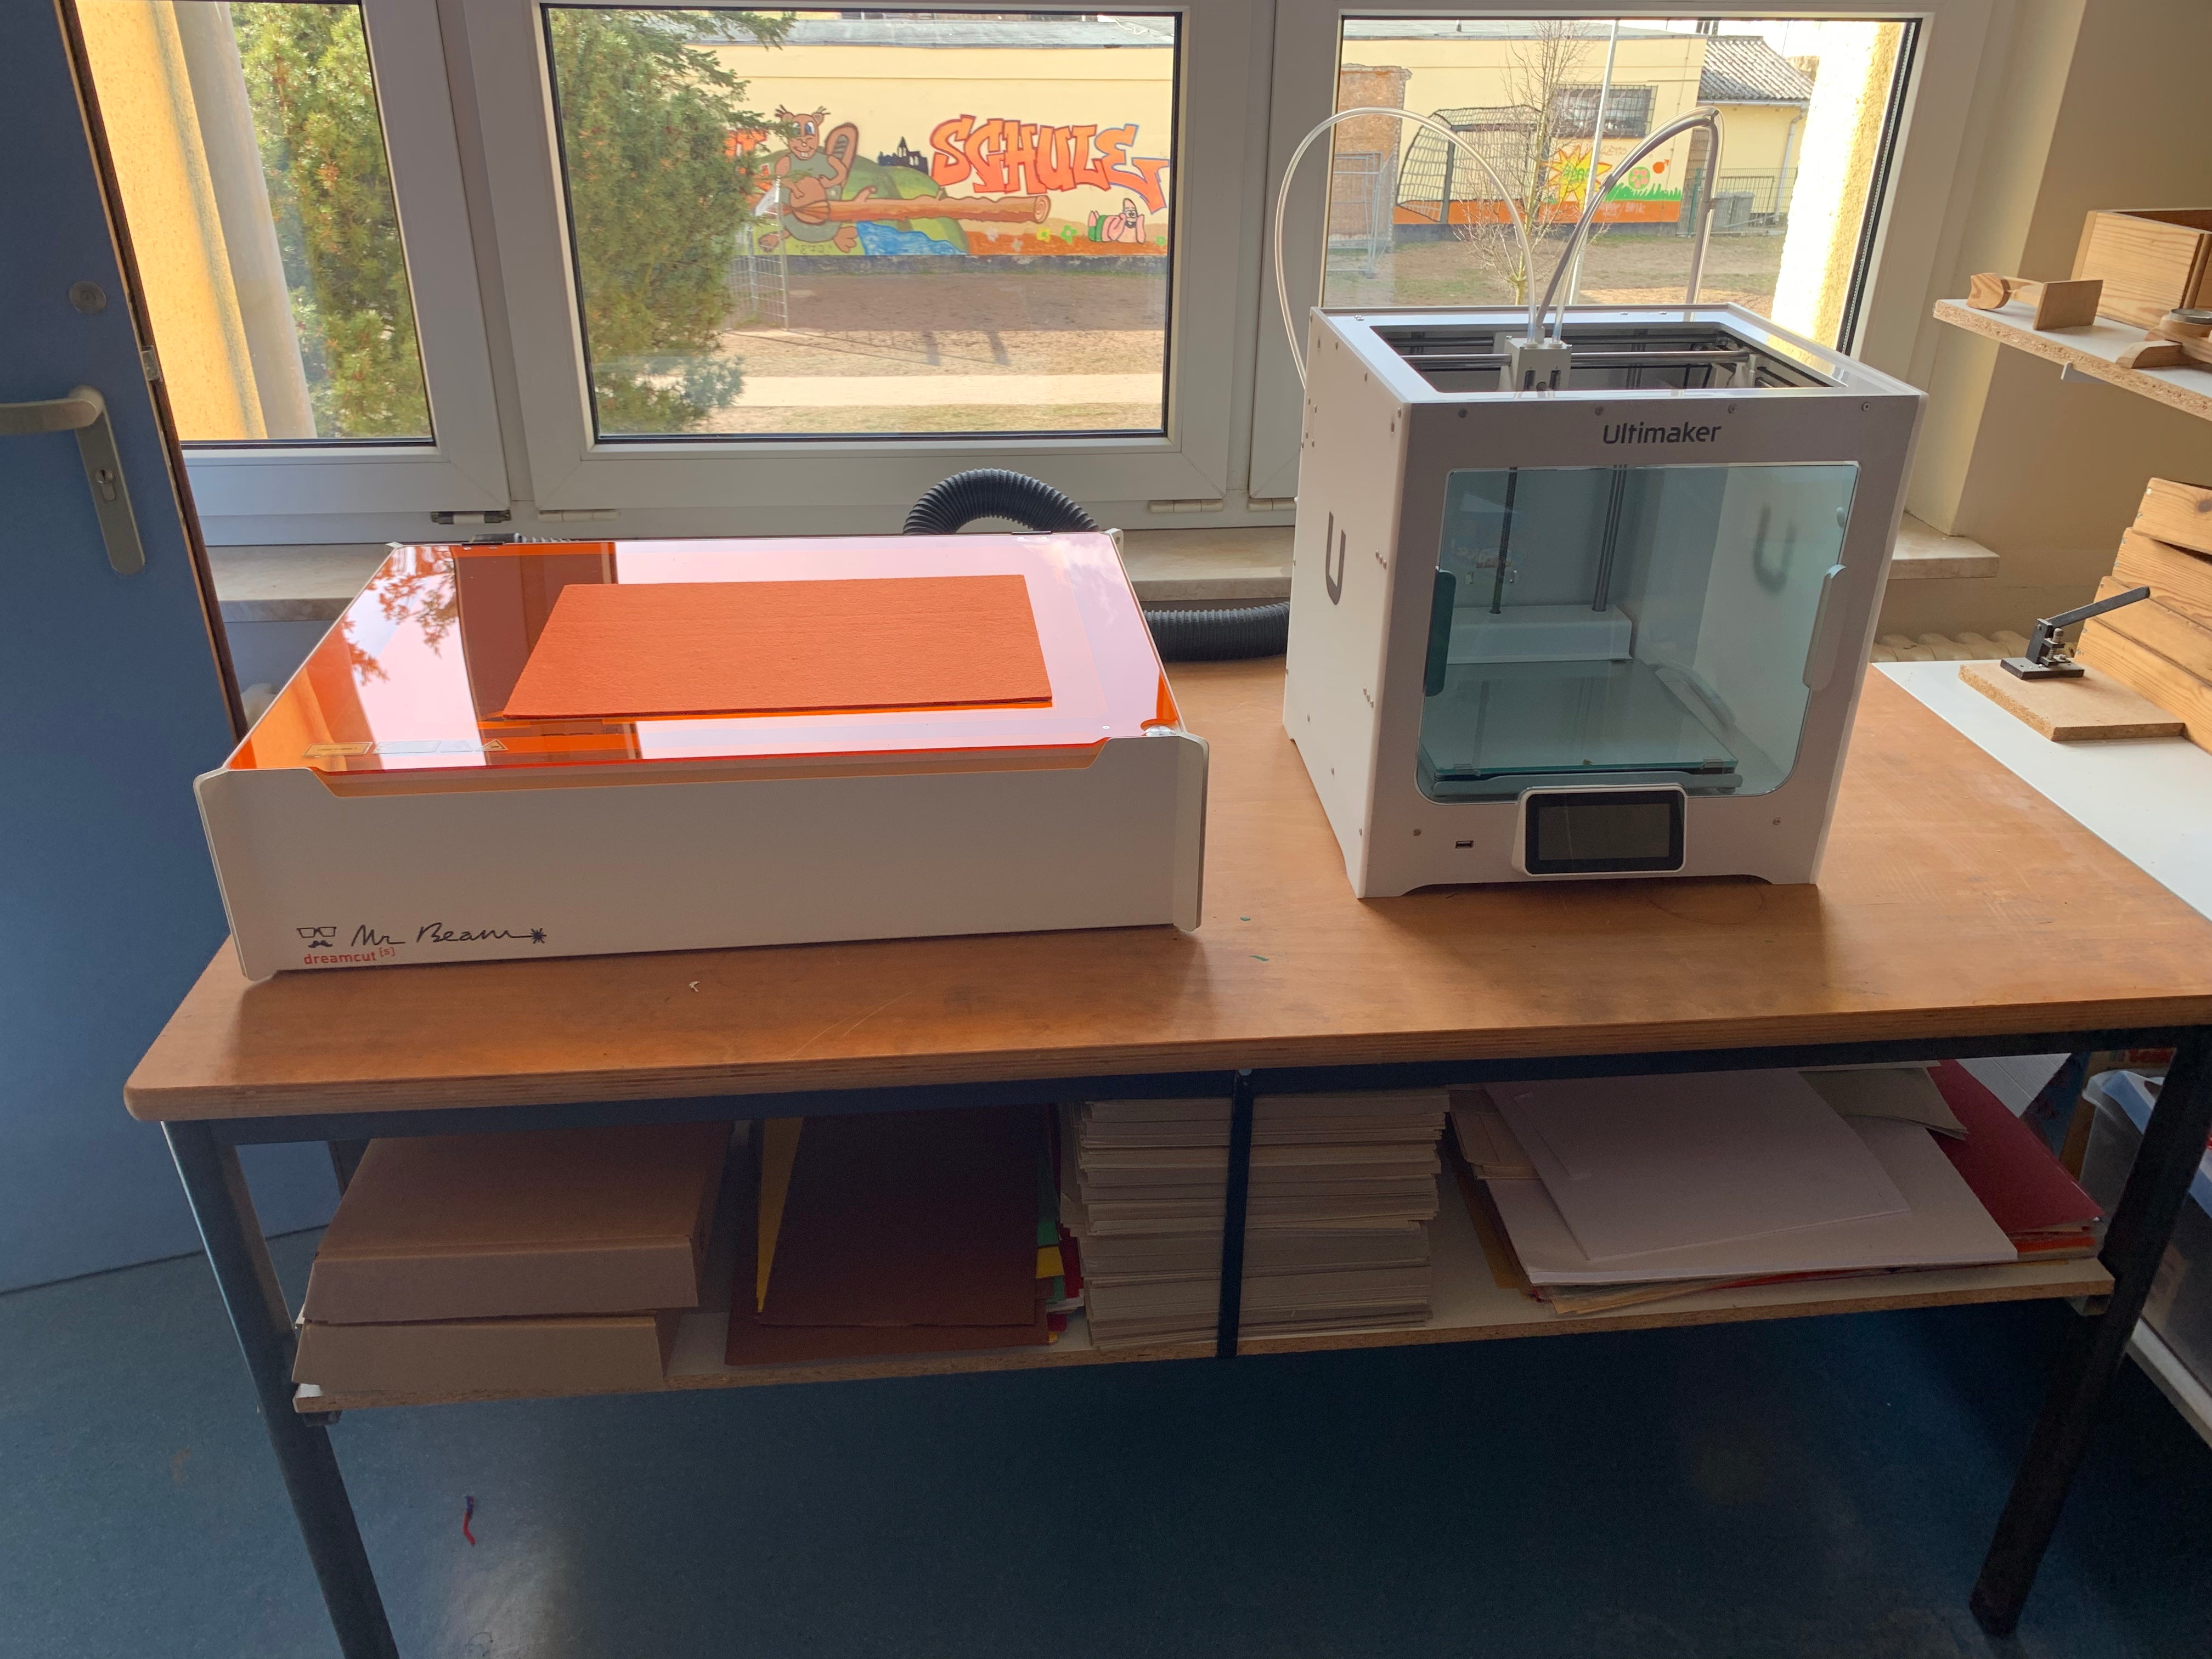 3D printers and laser cutters